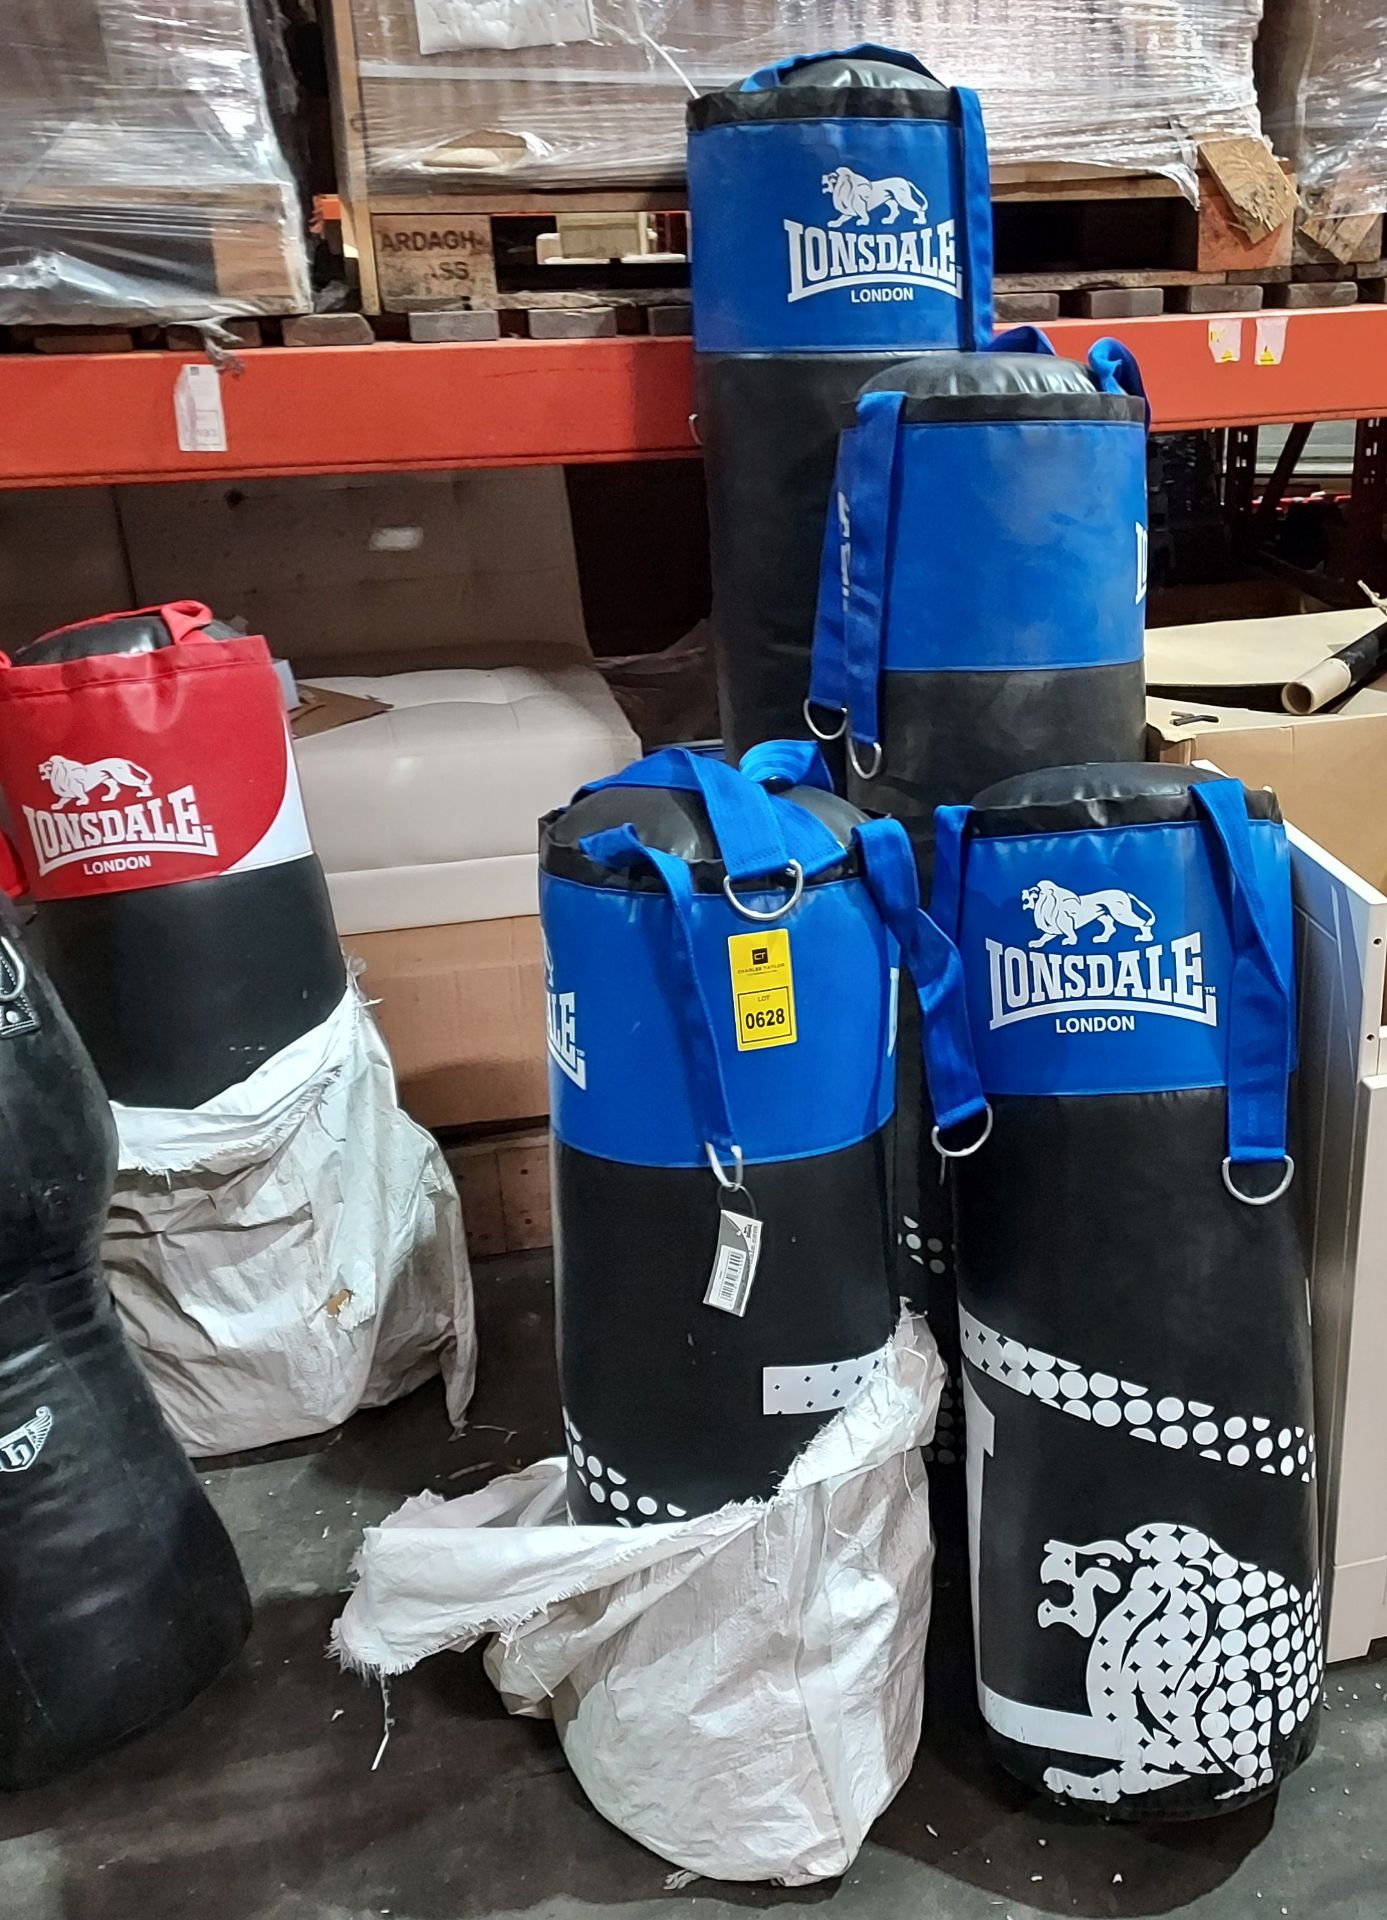 4 PIECE MIXED BOXING LOT CONTAINIG 1 X LONSDALE 5 FT BOXING BAG / 1 X LONSDALE 4 FT BOXING BAG / 2 X